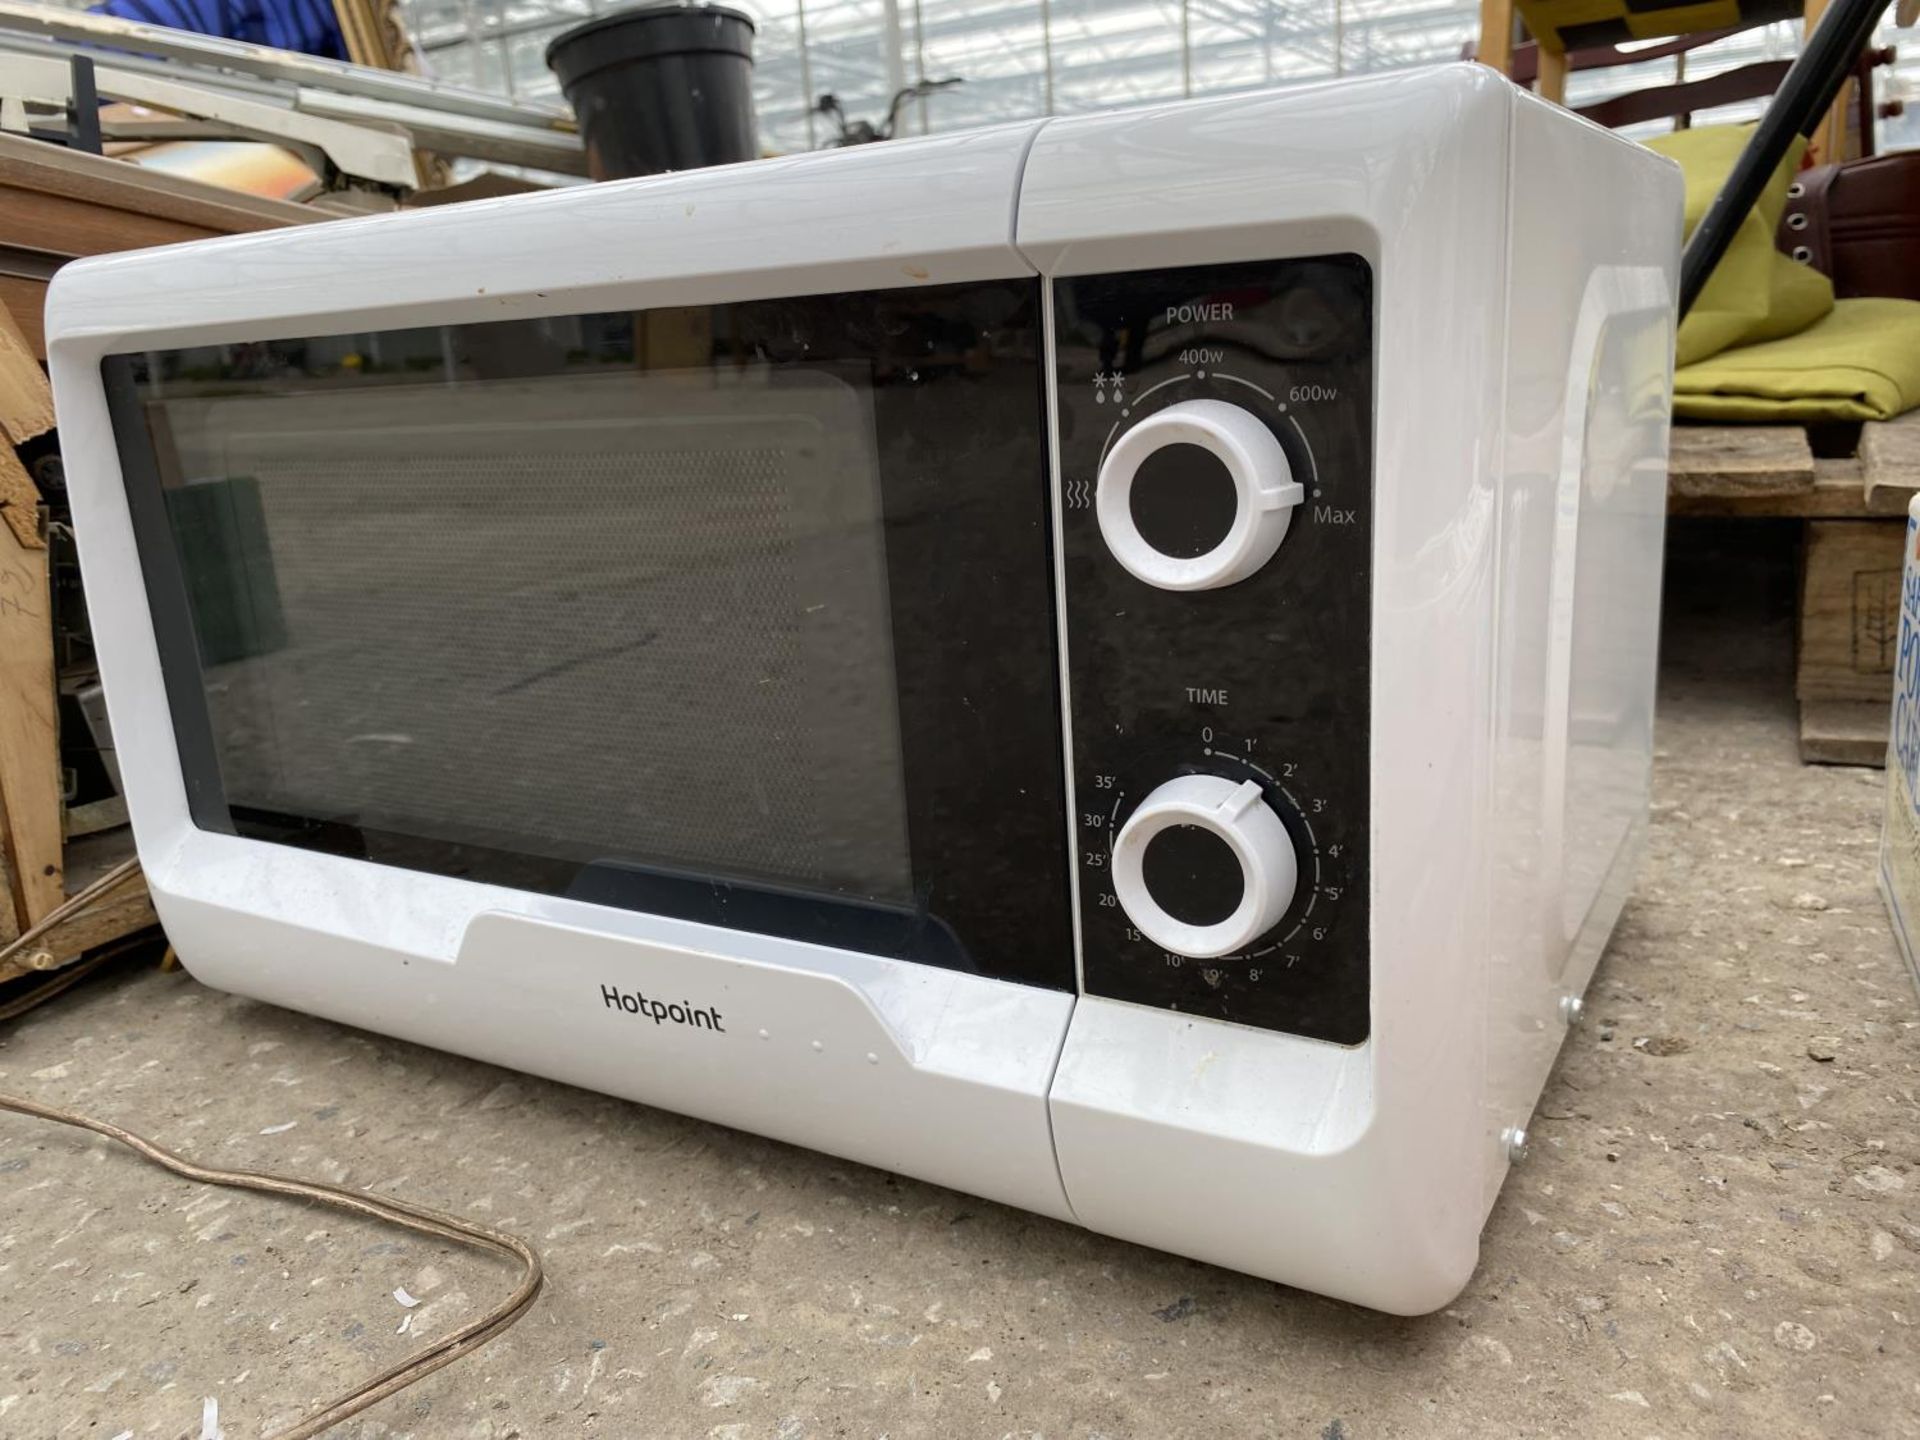 A WHITE HOTPOINT MICROWAVE OVEN - Image 2 of 3